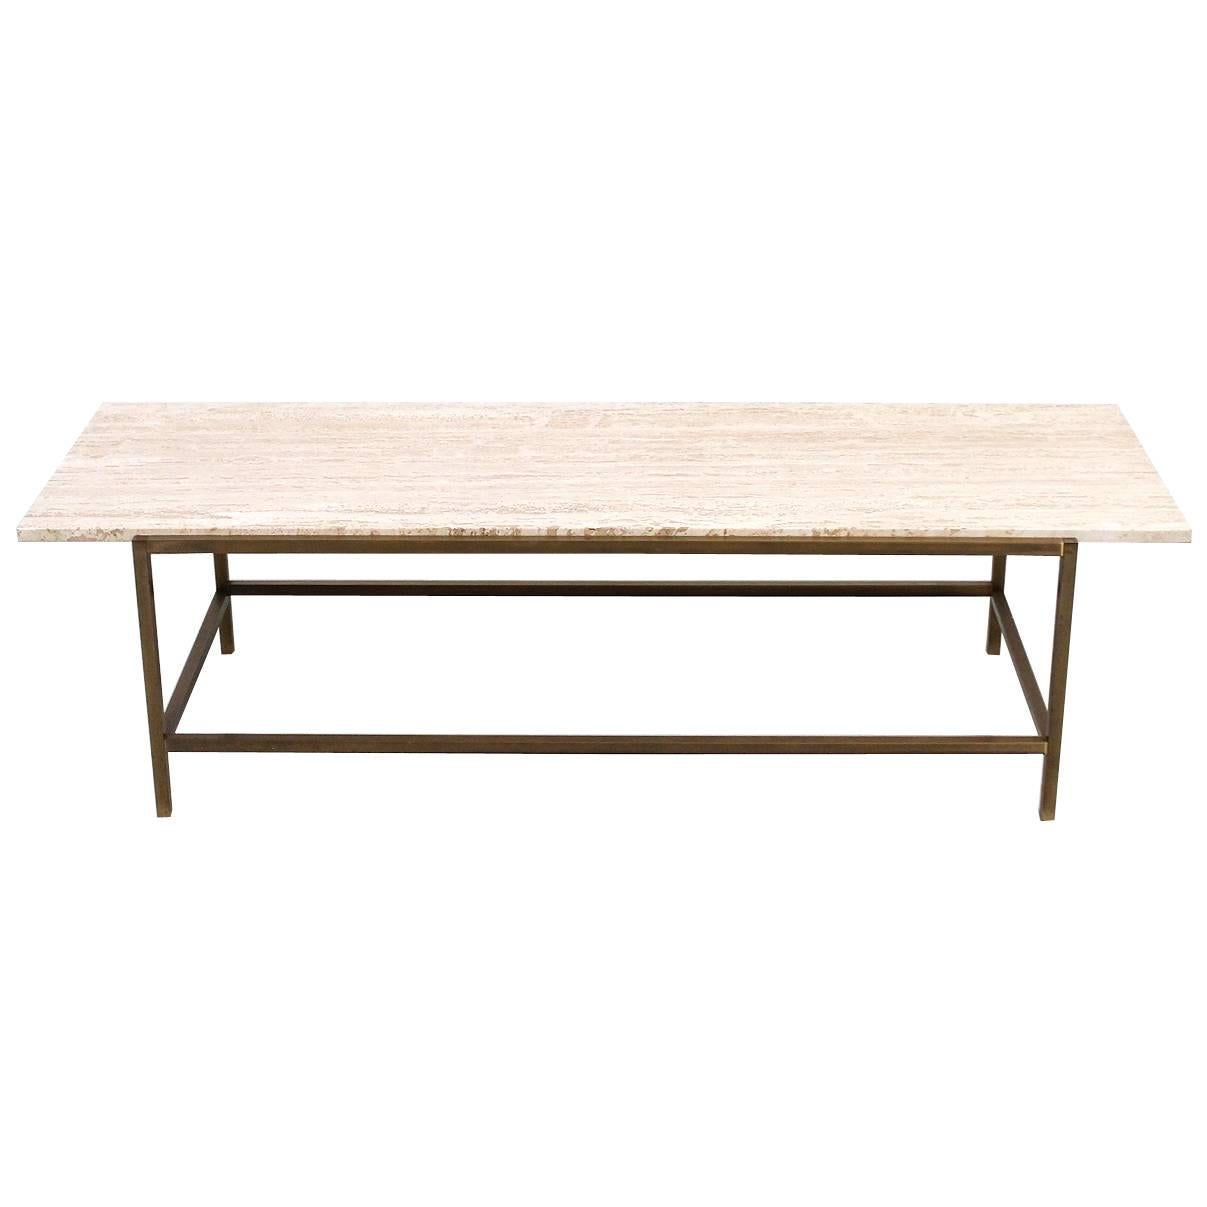 Brass and Travertine Table by Harvey Probber